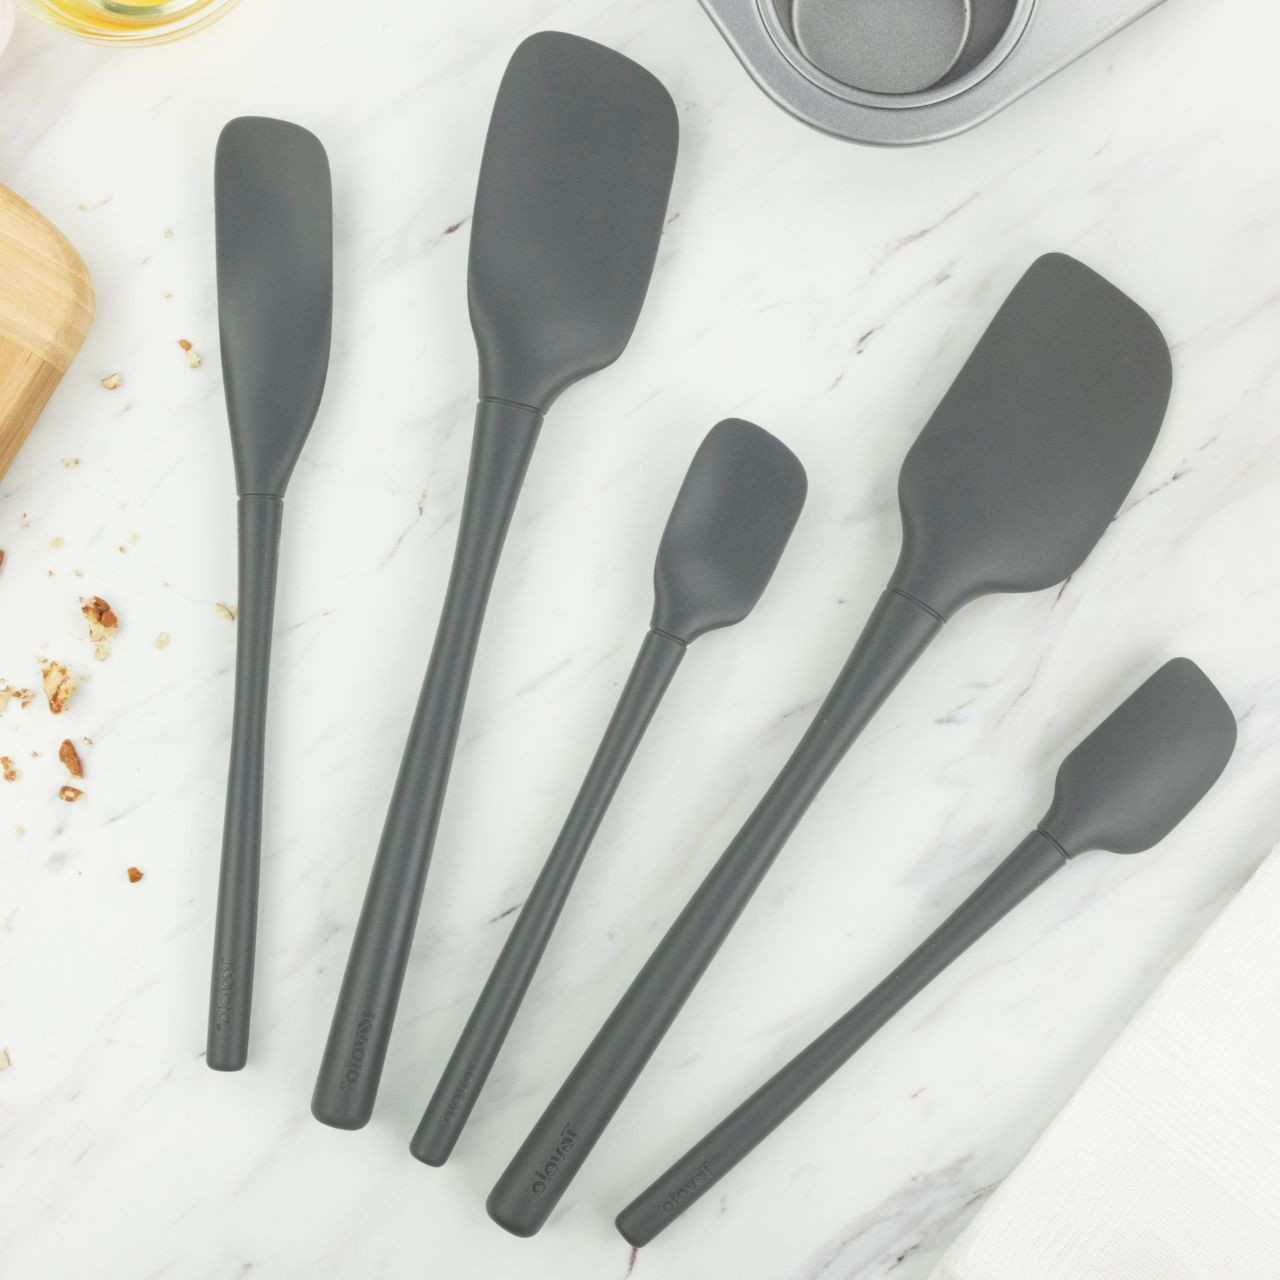 Tovolo Regular Flex-Core Spatula & Stainless Steel Handle (Charcoal)